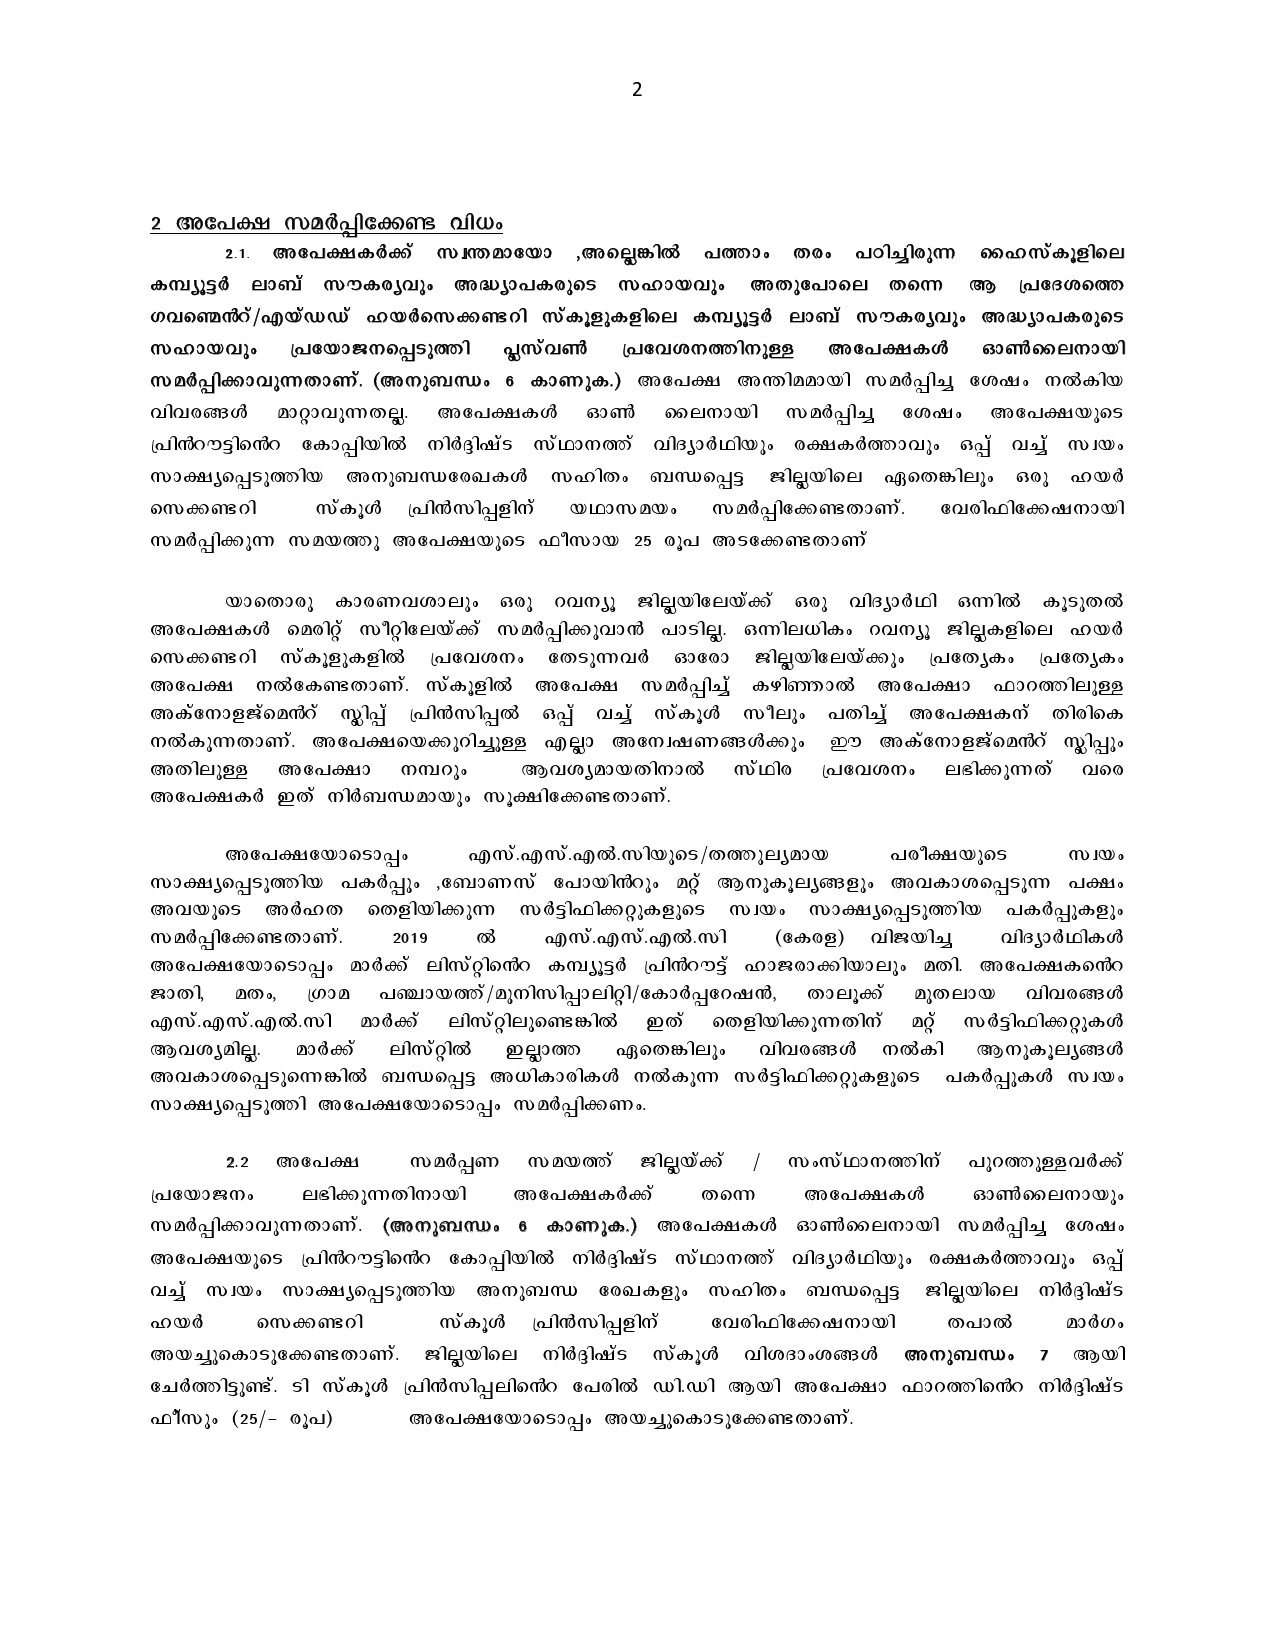 How To Apply For Kerala Higher Secondary Admission 2019 - Notification Image 2